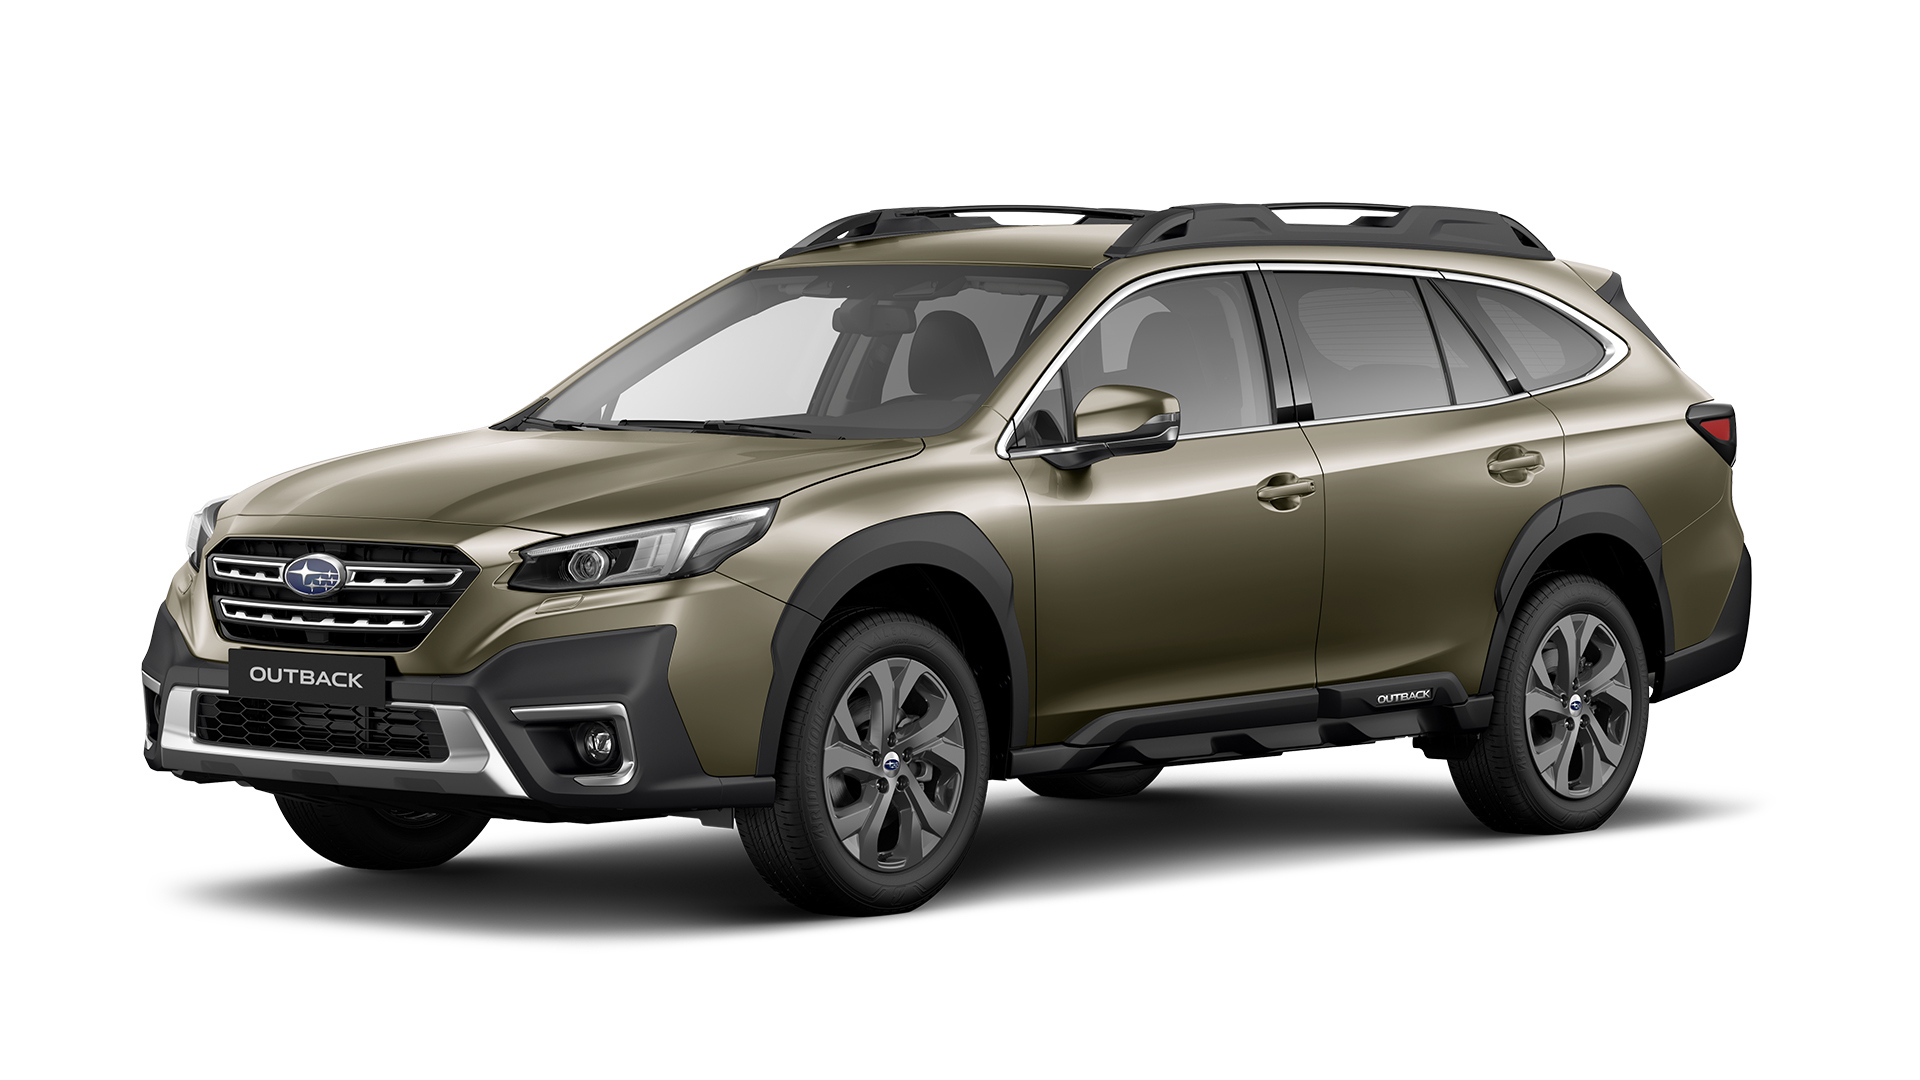 Subaru Outback 2.5i Active frontansicht